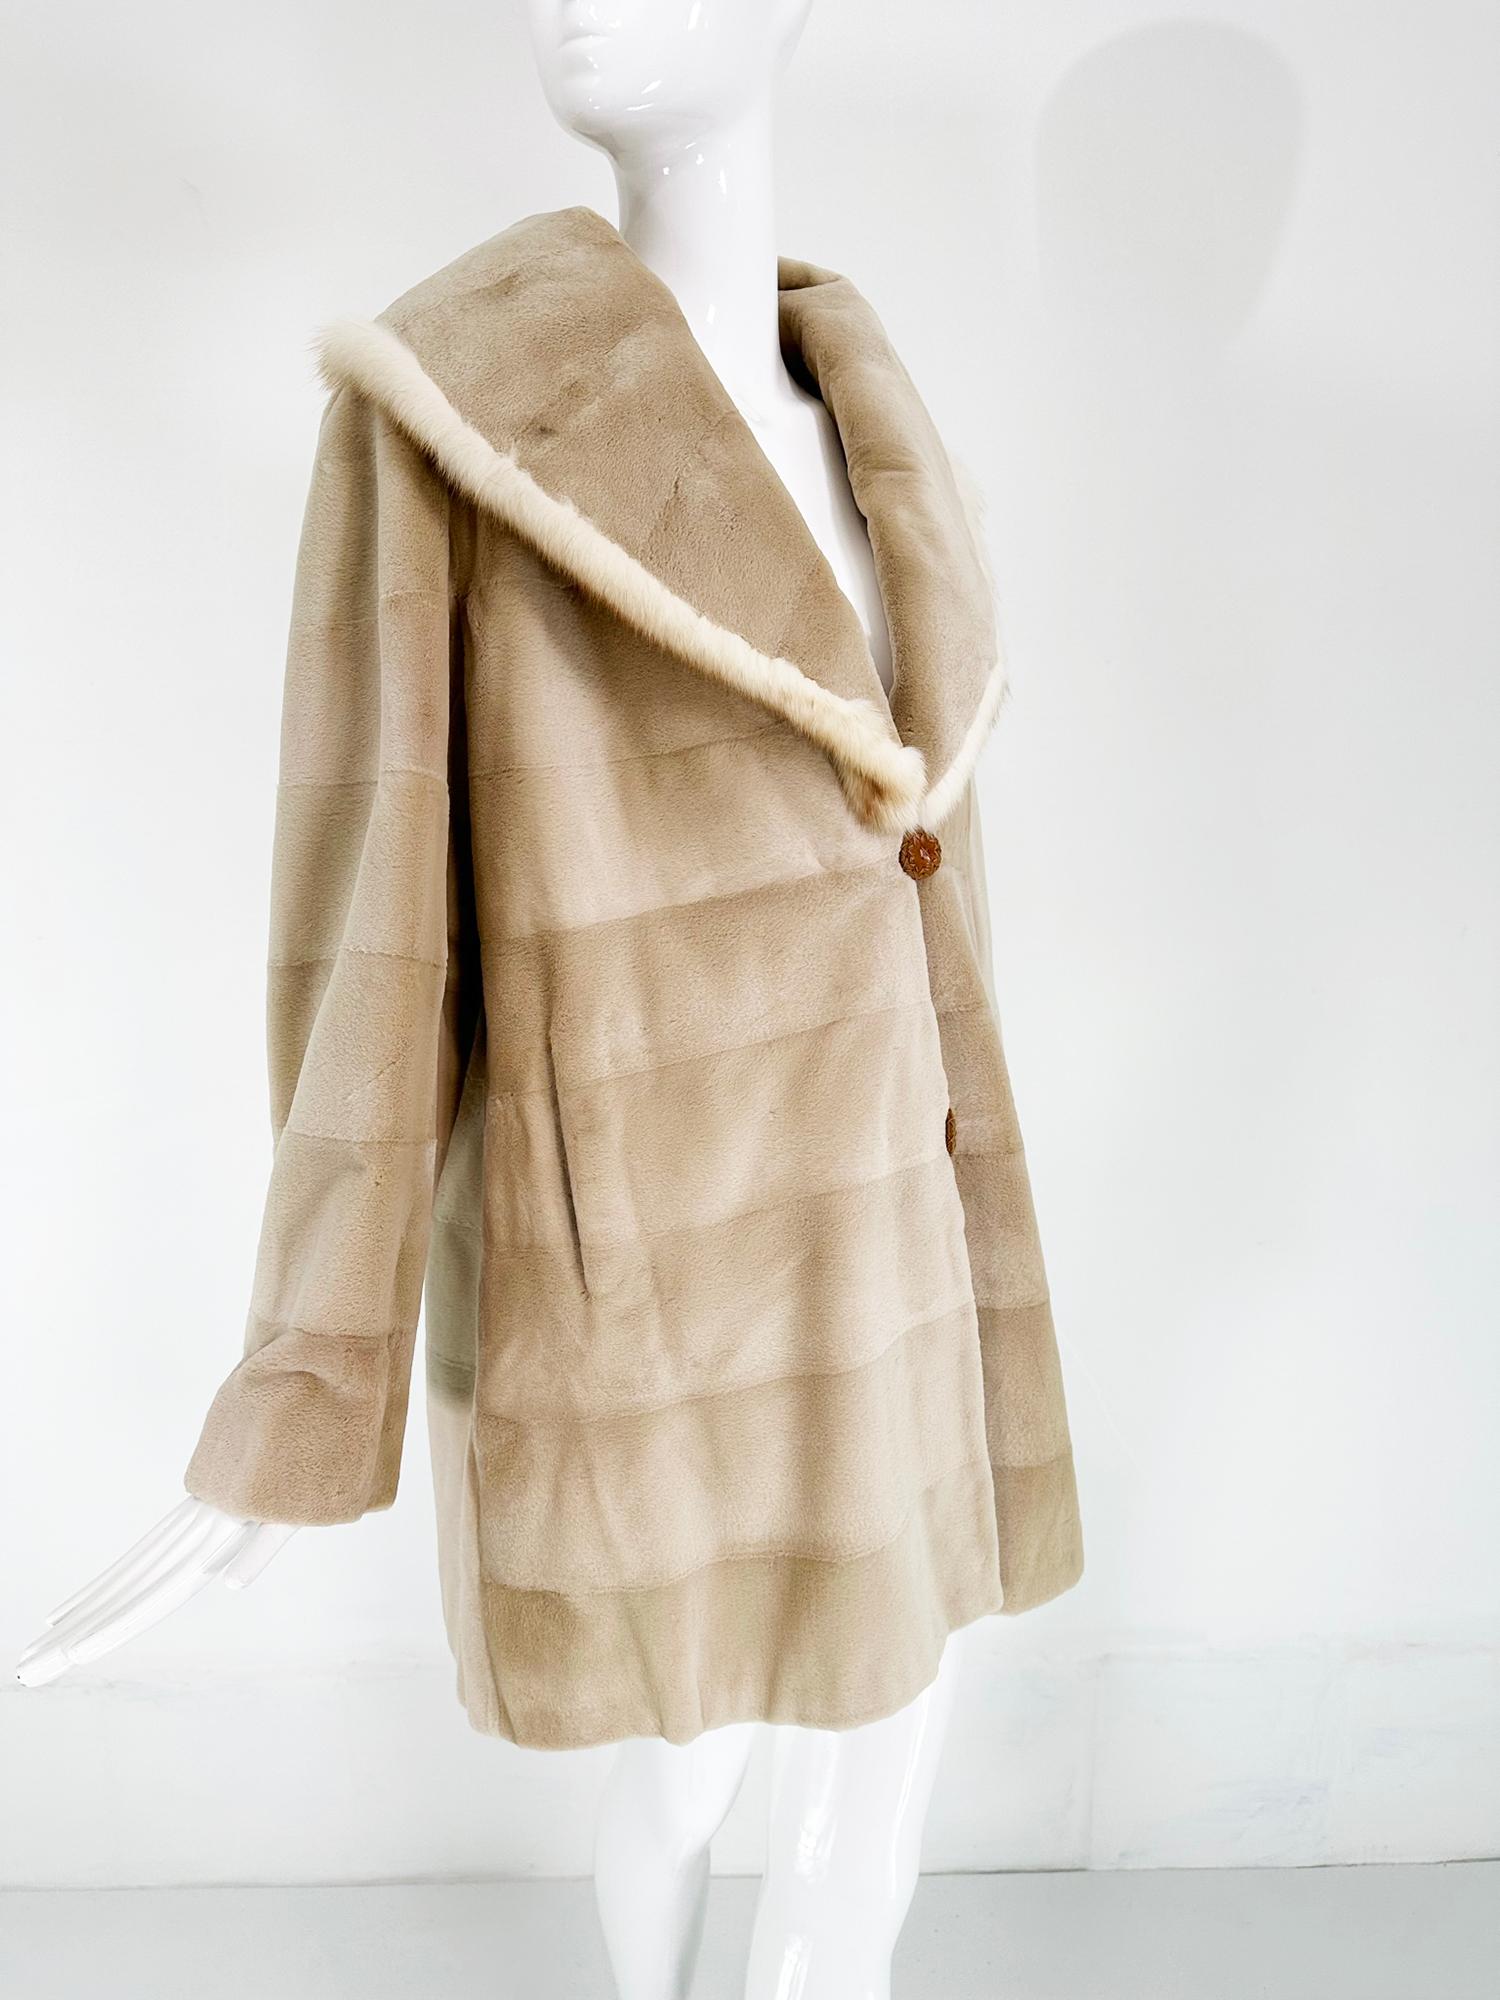 Champagne Blond Sheared Mink Reversible Jacket With Full Shawl Collar  In Good Condition For Sale In West Palm Beach, FL